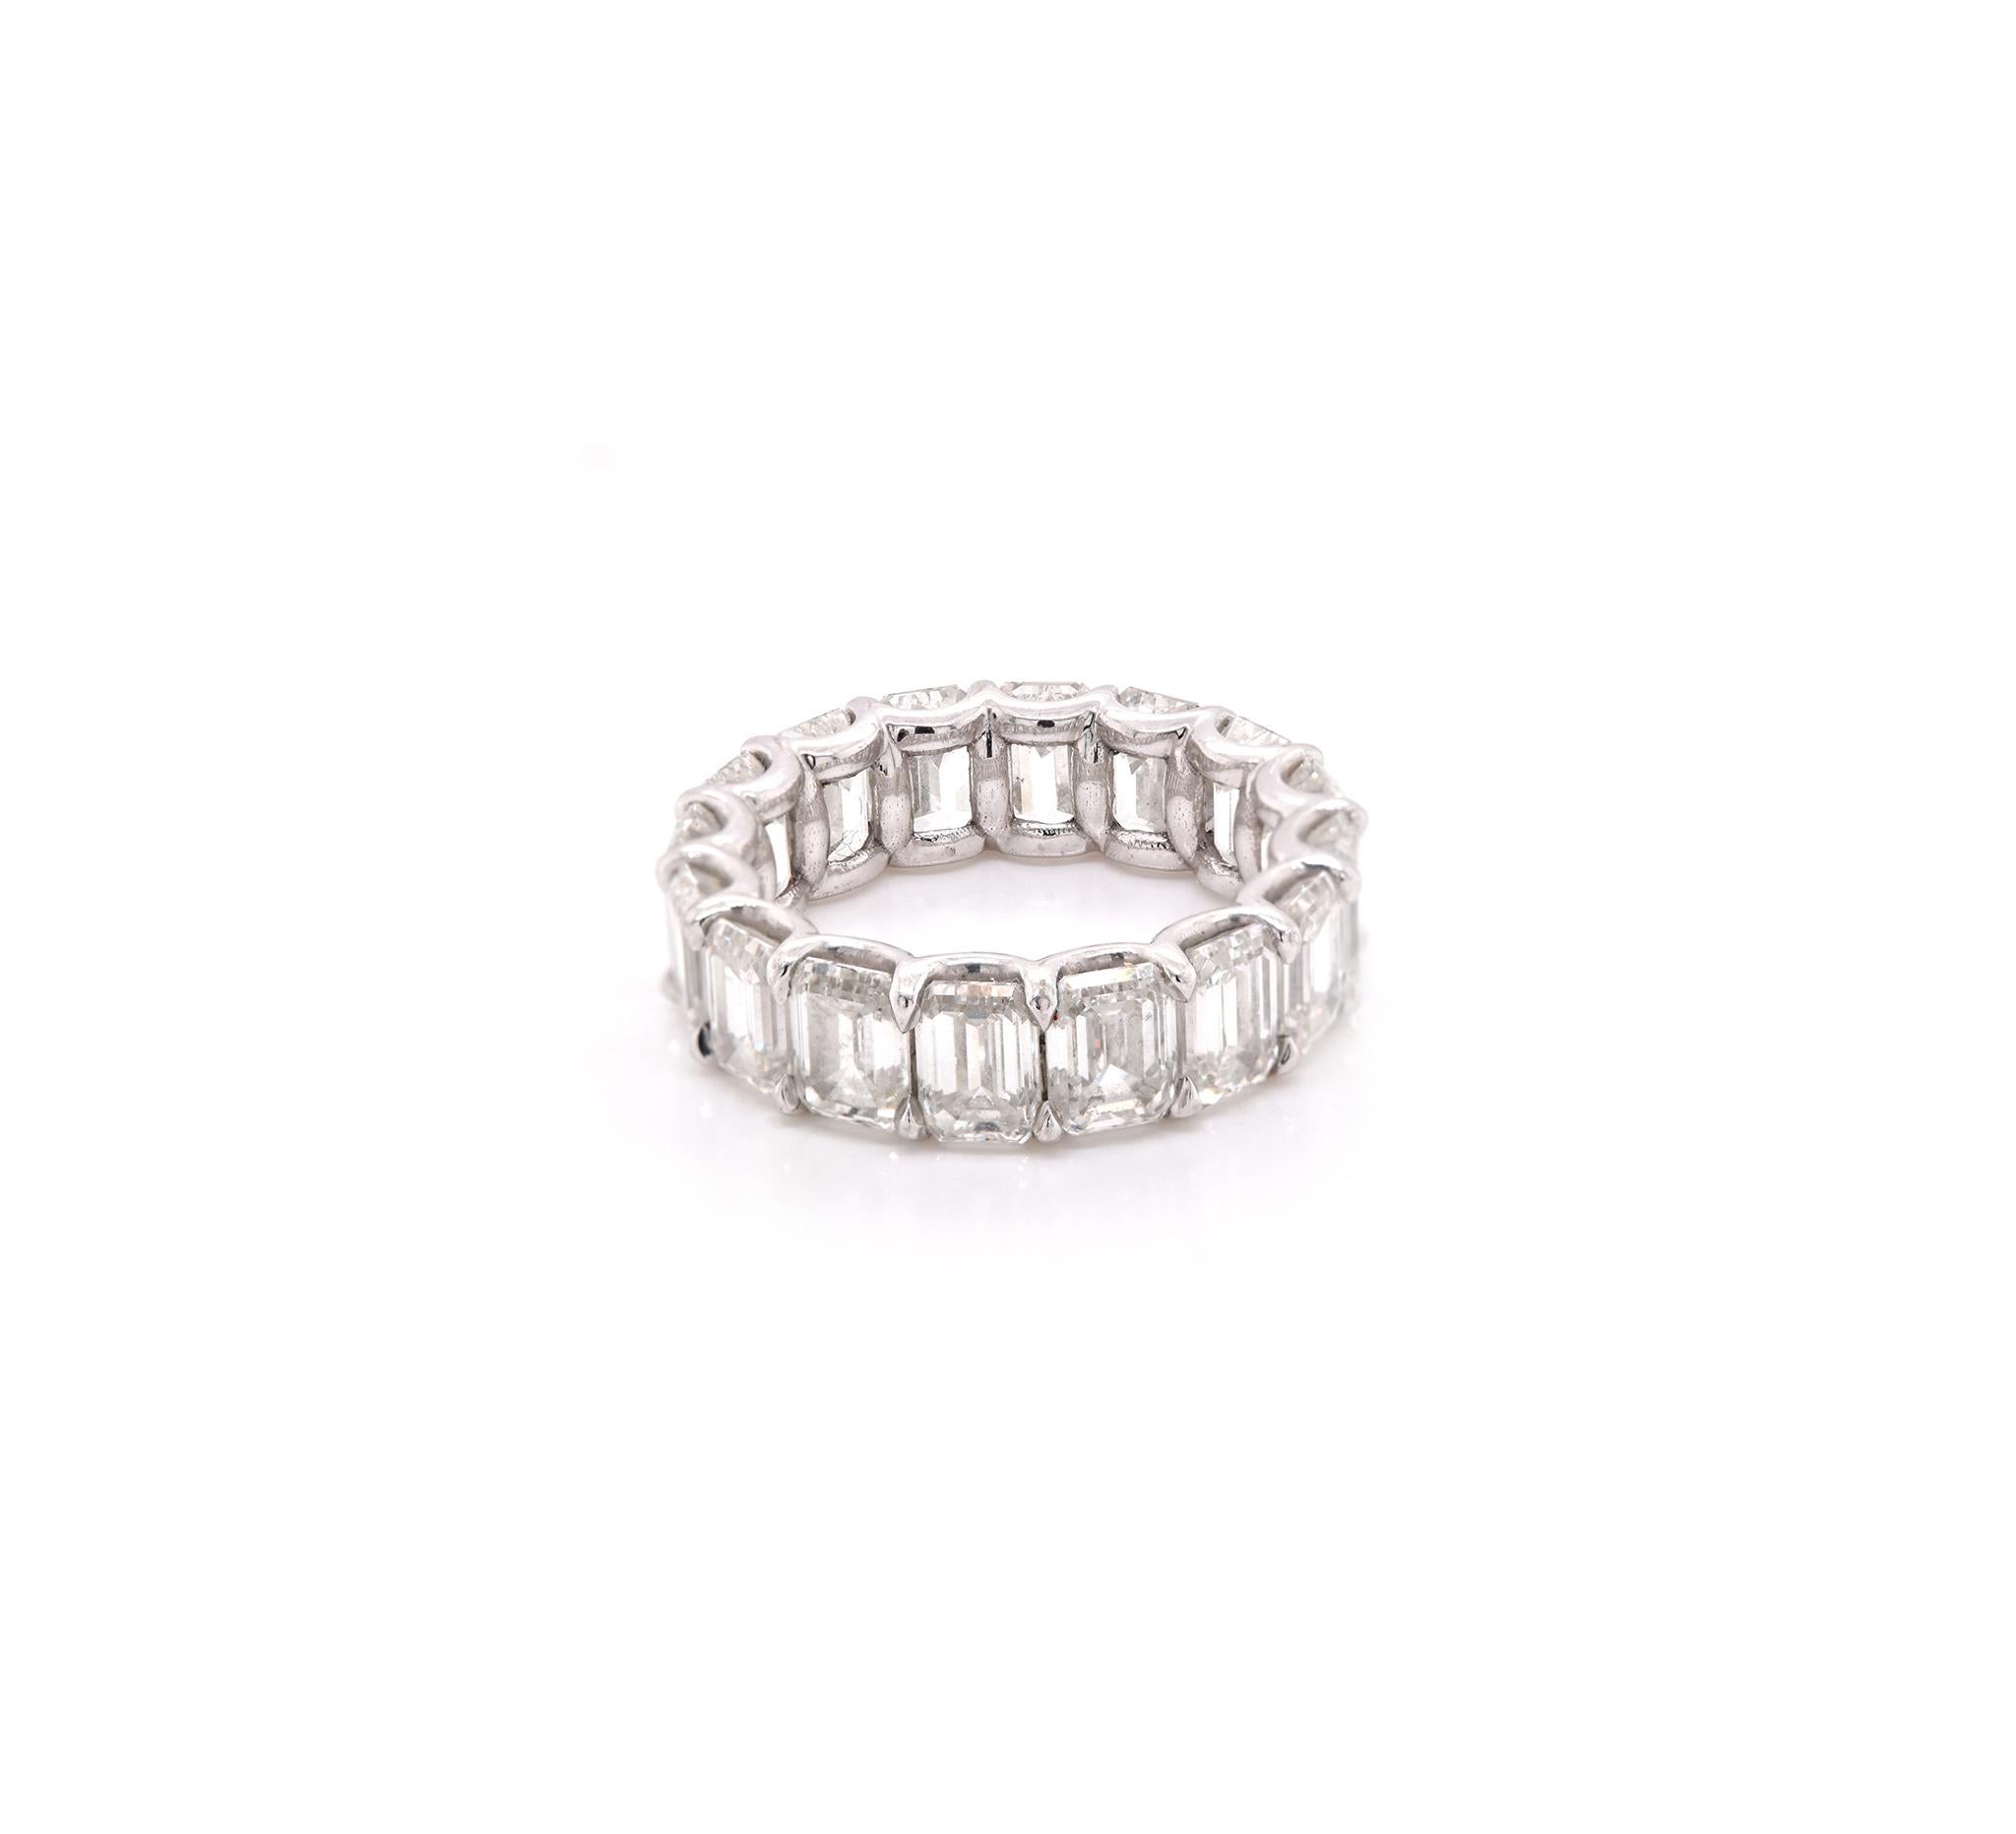 Designer: Custom
Material: platinum
Diamonds: 16 emerald cut =8.48cttw
Color: G - H
Clarity: (2) IF, (2) VVS1, (2) VVS2, (2) VS1, (8) VS2
GIA CERTS INCLUDED
Size: 5.5
Dimensions: ring measures 5.82mm in width
Weight: 6.49 grams
